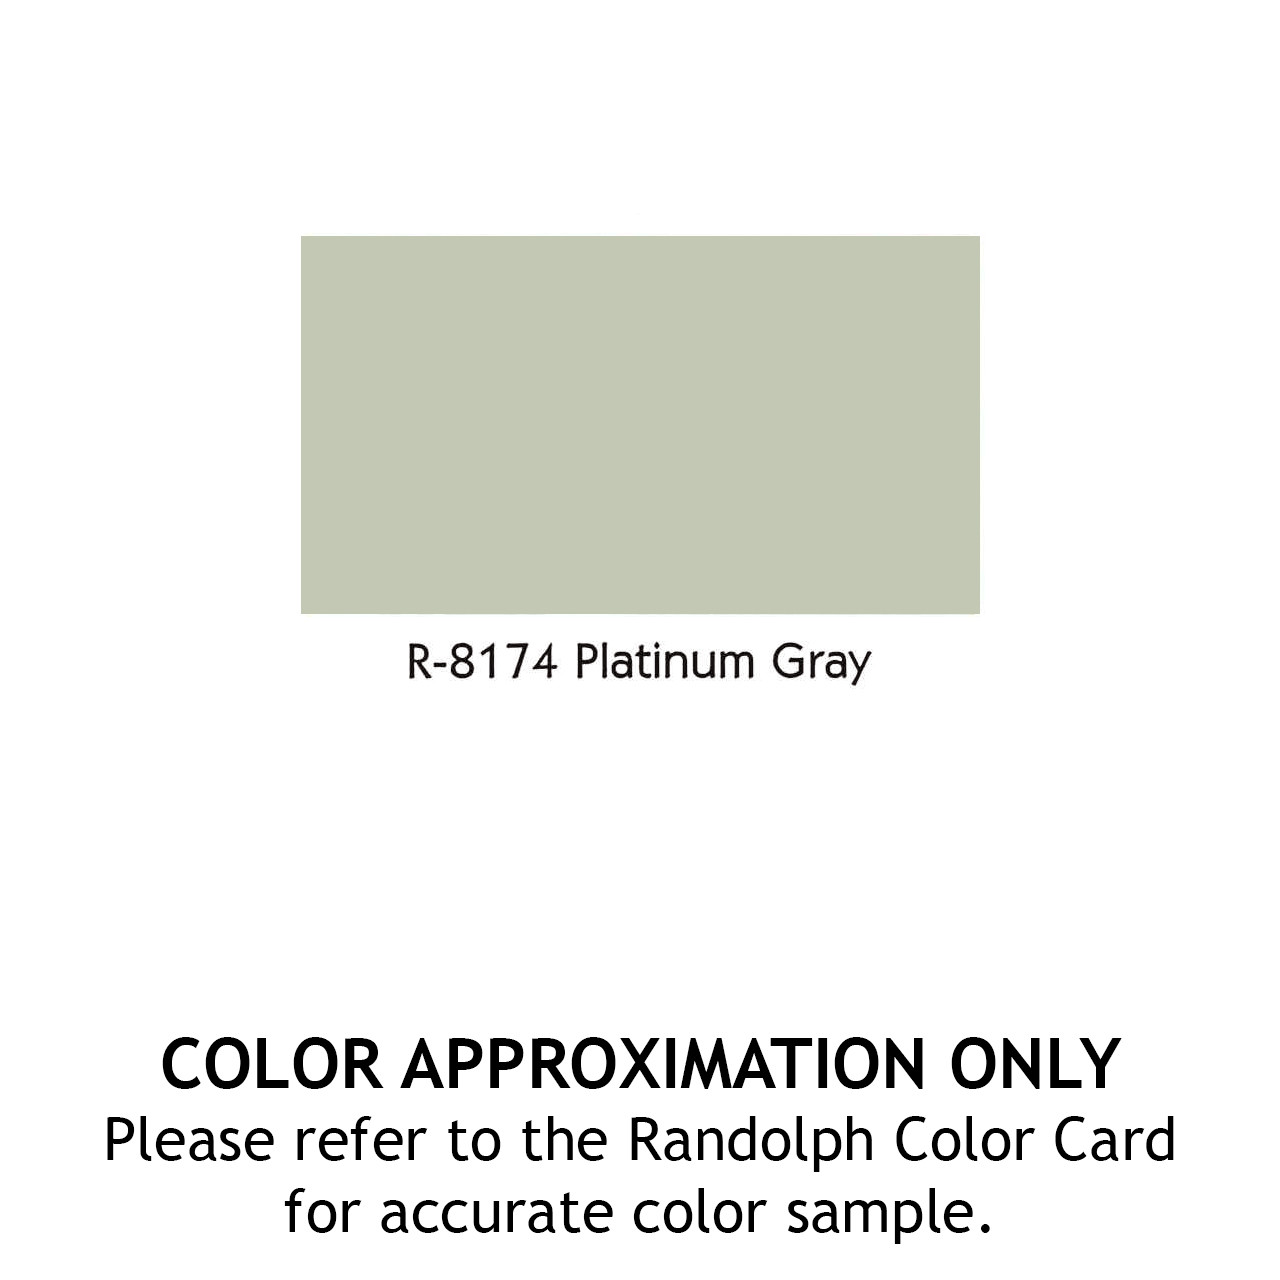 RANDOLPH COLORED BUTYRATE DOPE - PLATINUM GRAY